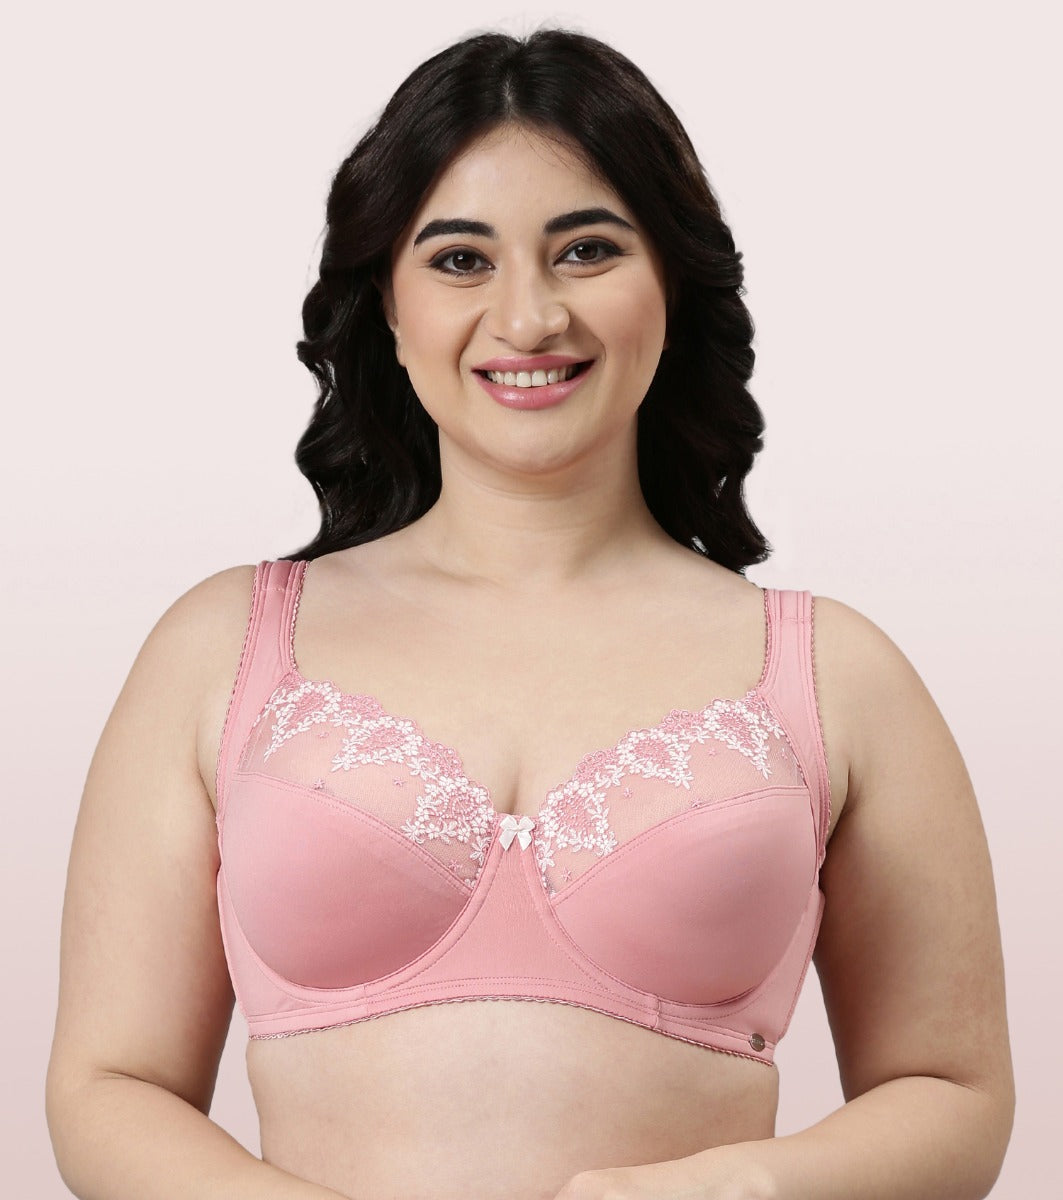 Enamor Perfect Lift Full Support Bra For Women | Non-Padded, Wired, High Coverage Bra With Pretty Lace Detailing | F087 | Confetti